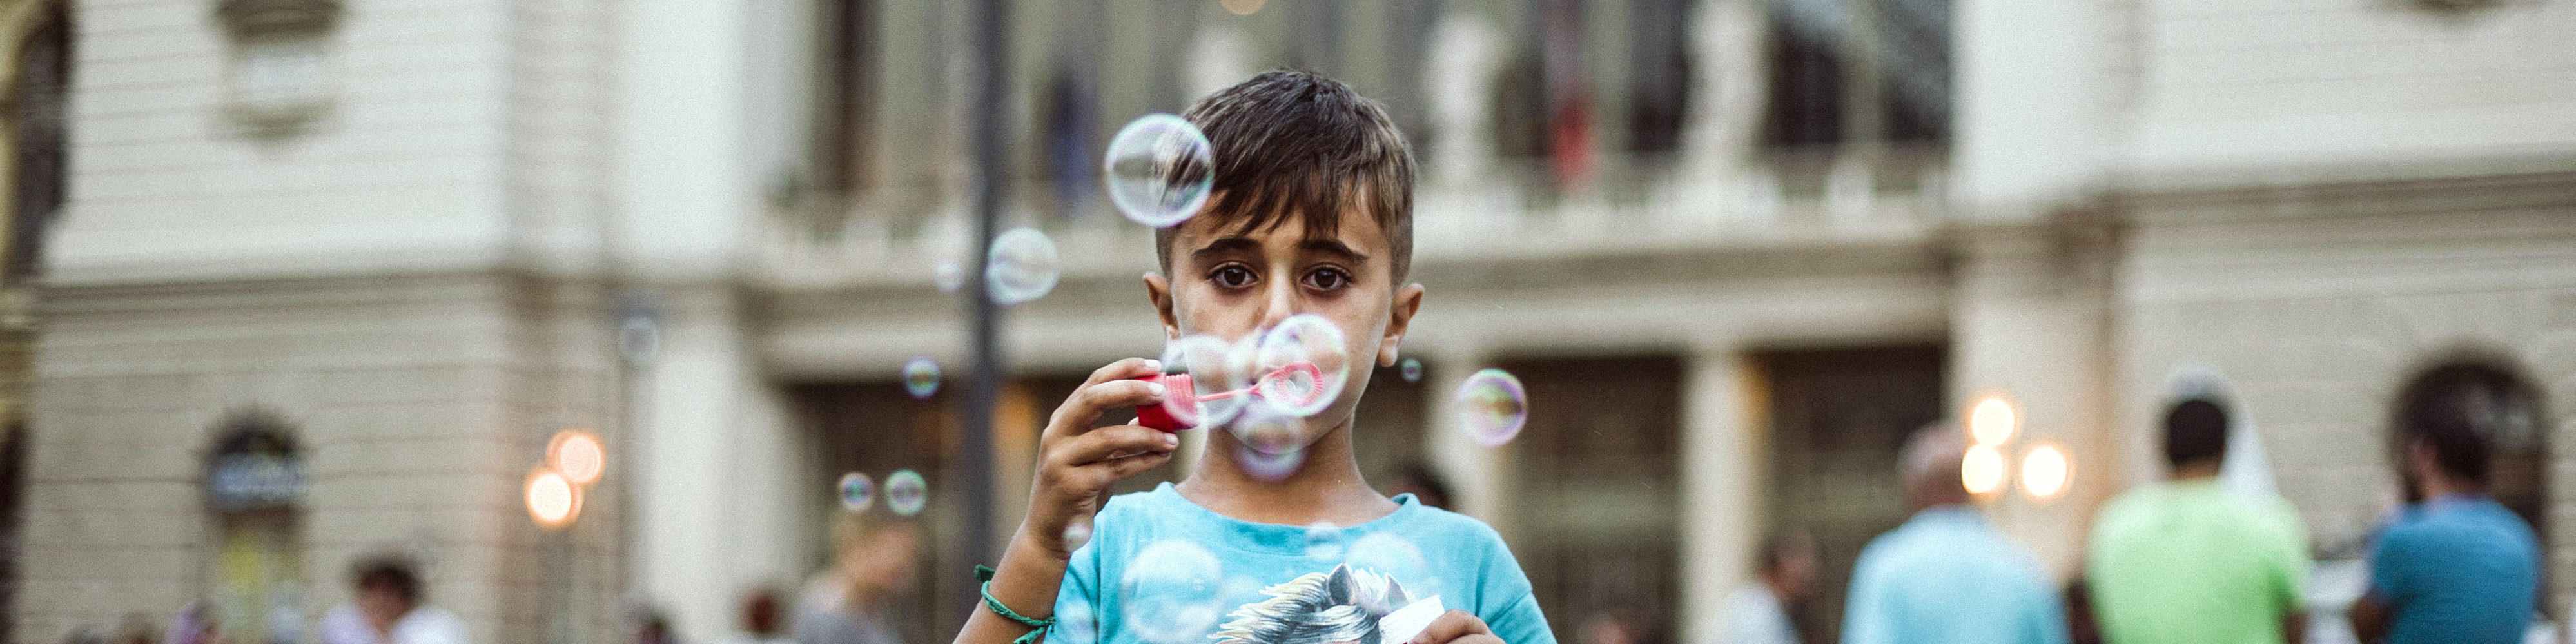 Syrian refugee playing with soap bubbles in Hungary.